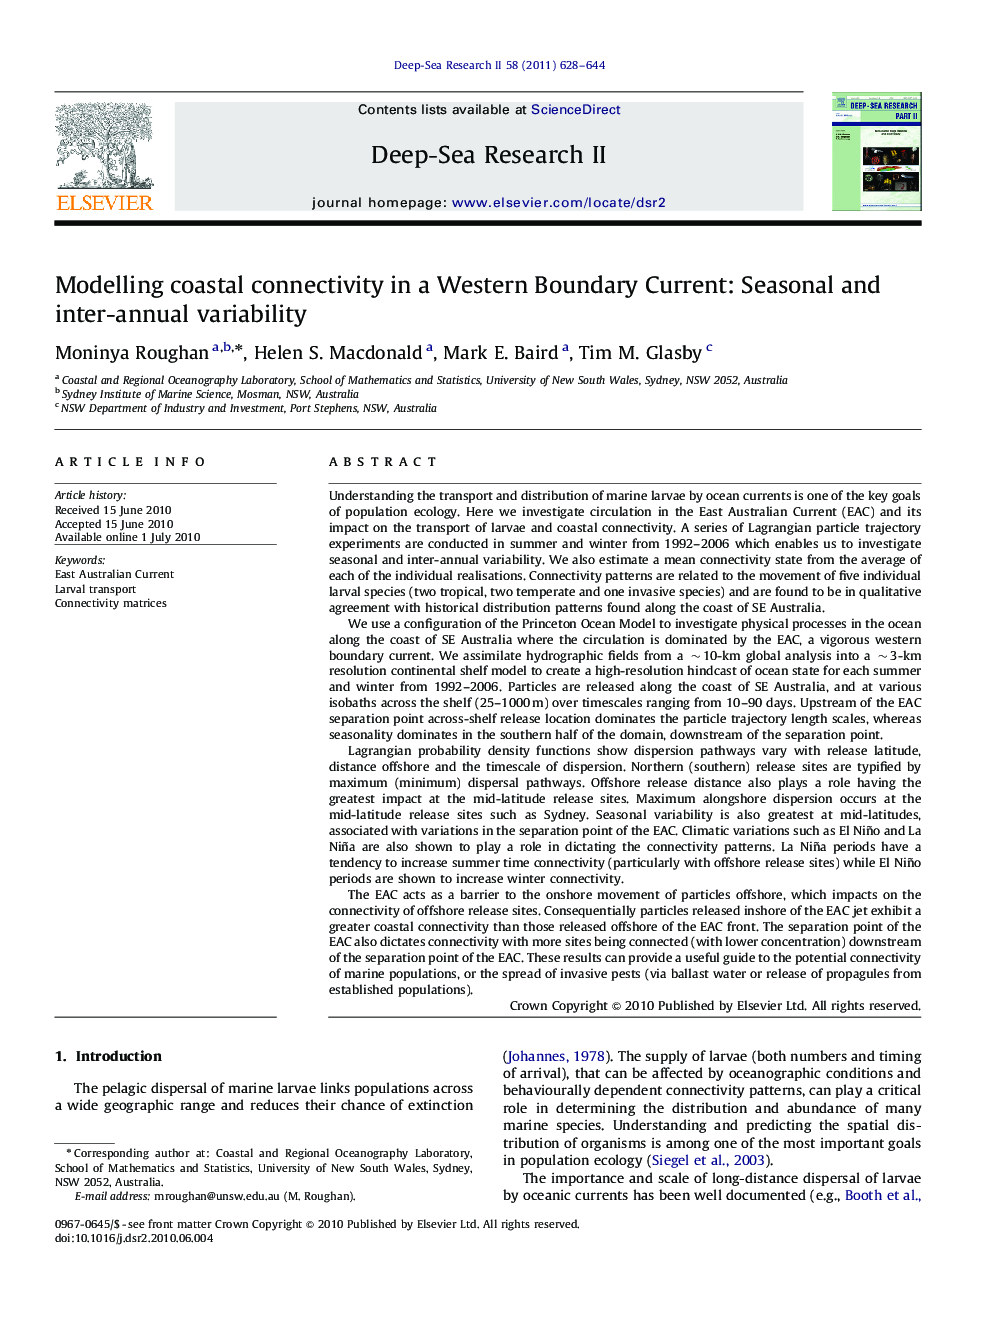 Modelling coastal connectivity in a Western Boundary Current: Seasonal and inter-annual variability